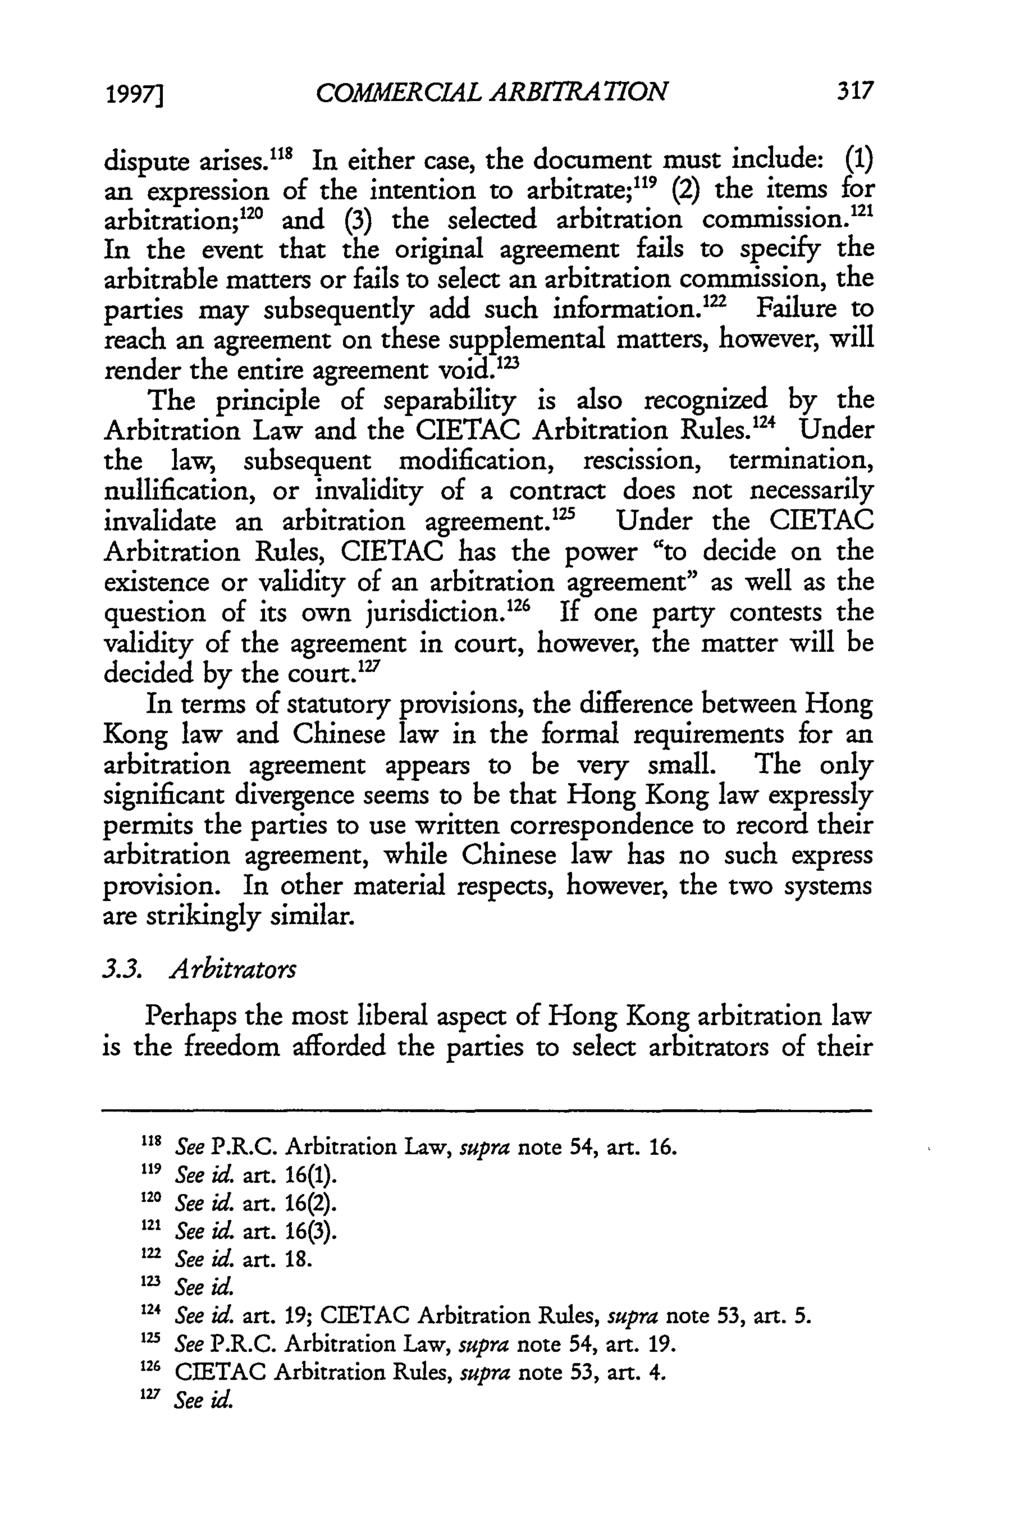 19971 Fishburne and Lian: Commercial Arbitration in Hong Kong and China: A Comparative Anal COMMERCIAL ARBI7RA TION dispute arises.